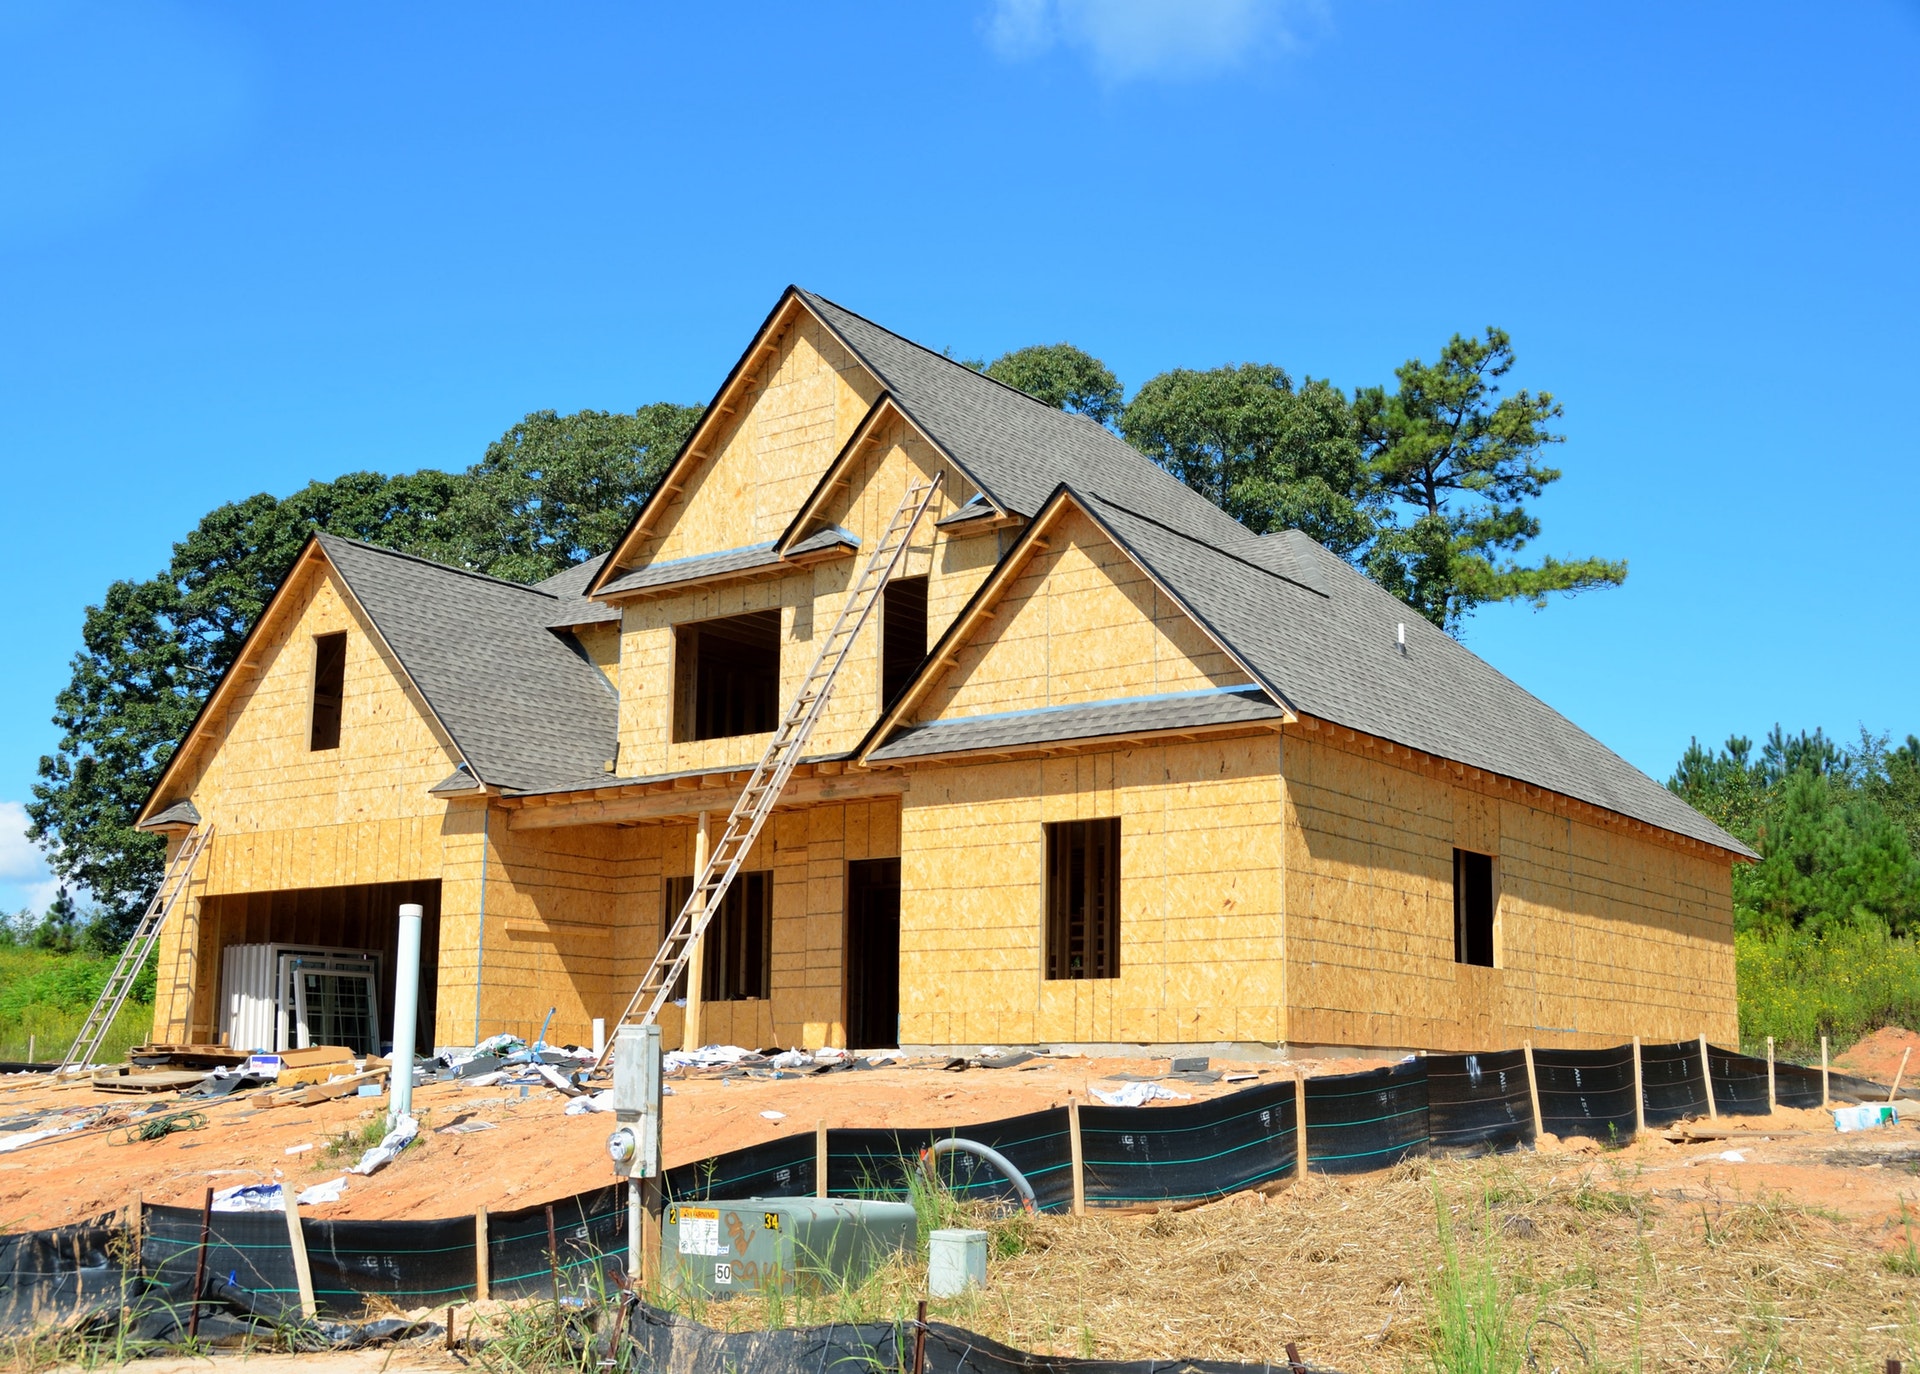 3 Signs that You’ve Found the Right Home Builder